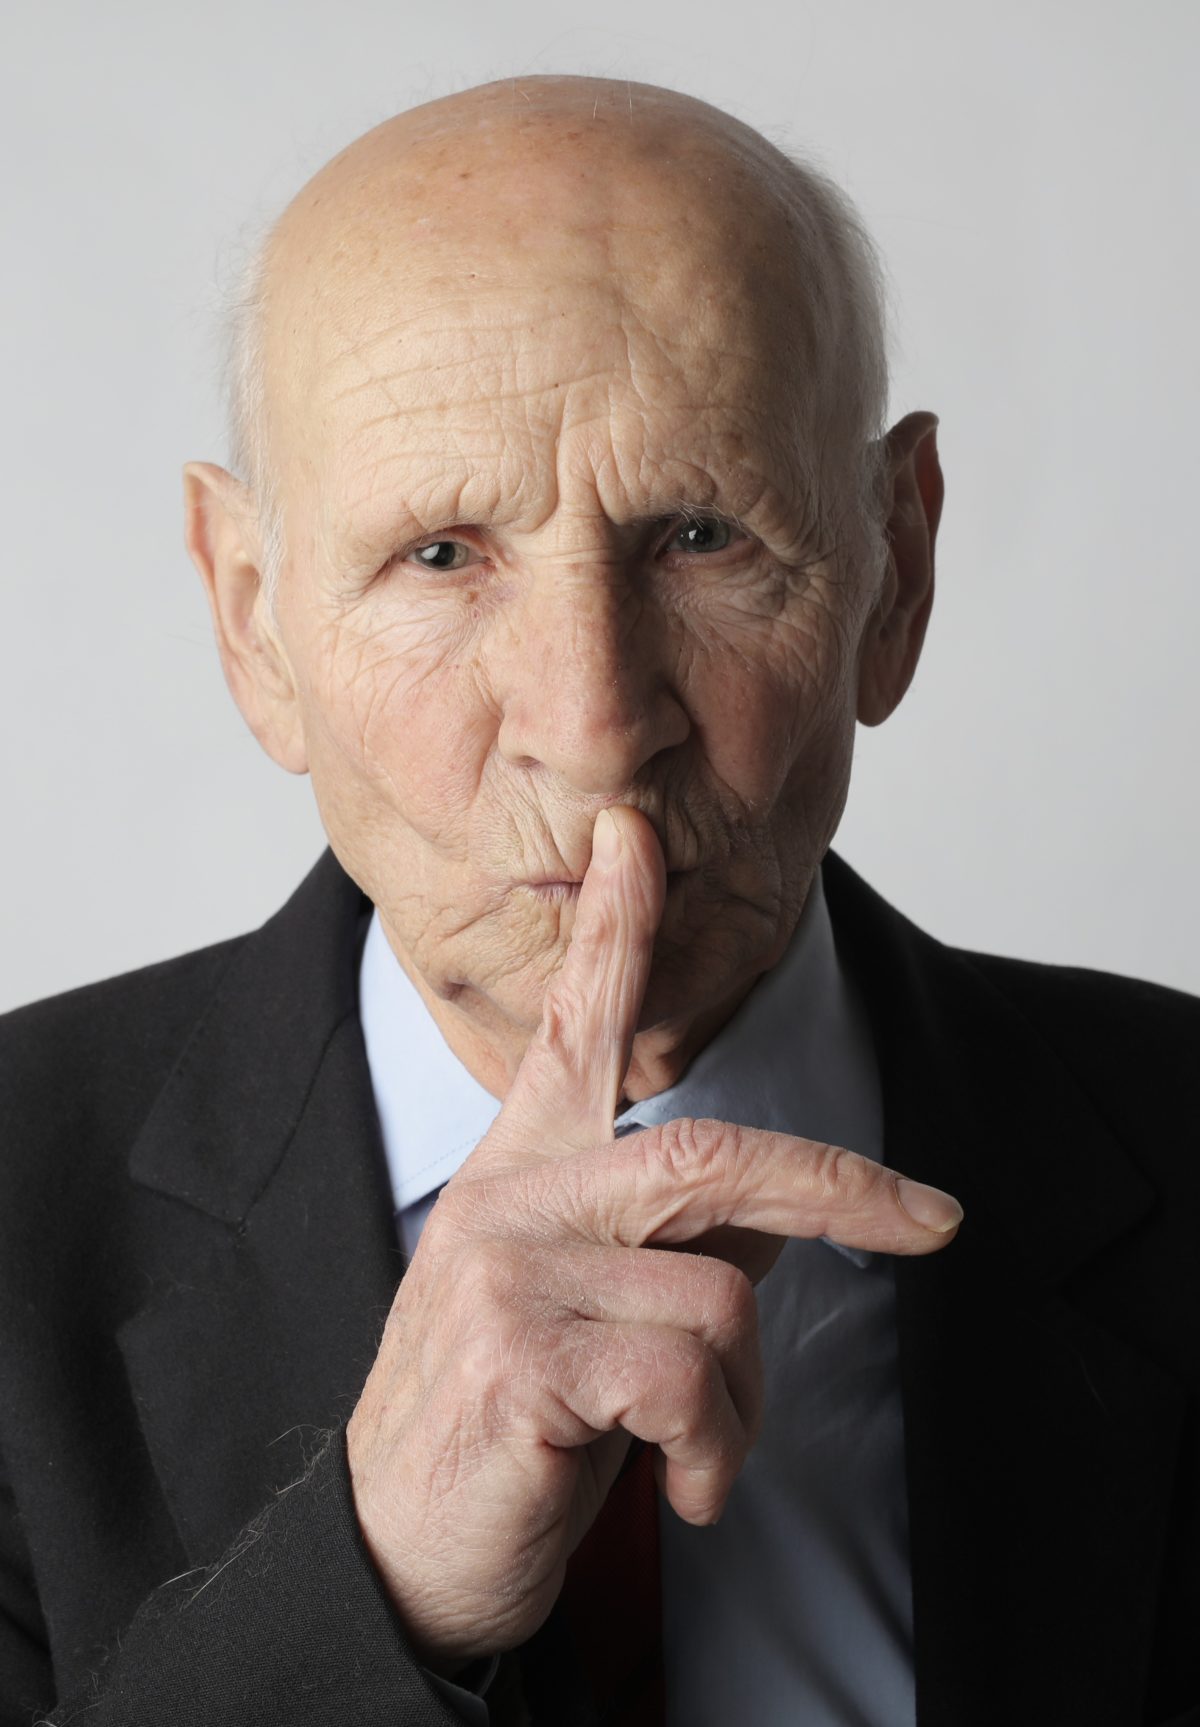 An older man holding a finger up to his lips to make the silence gesture.